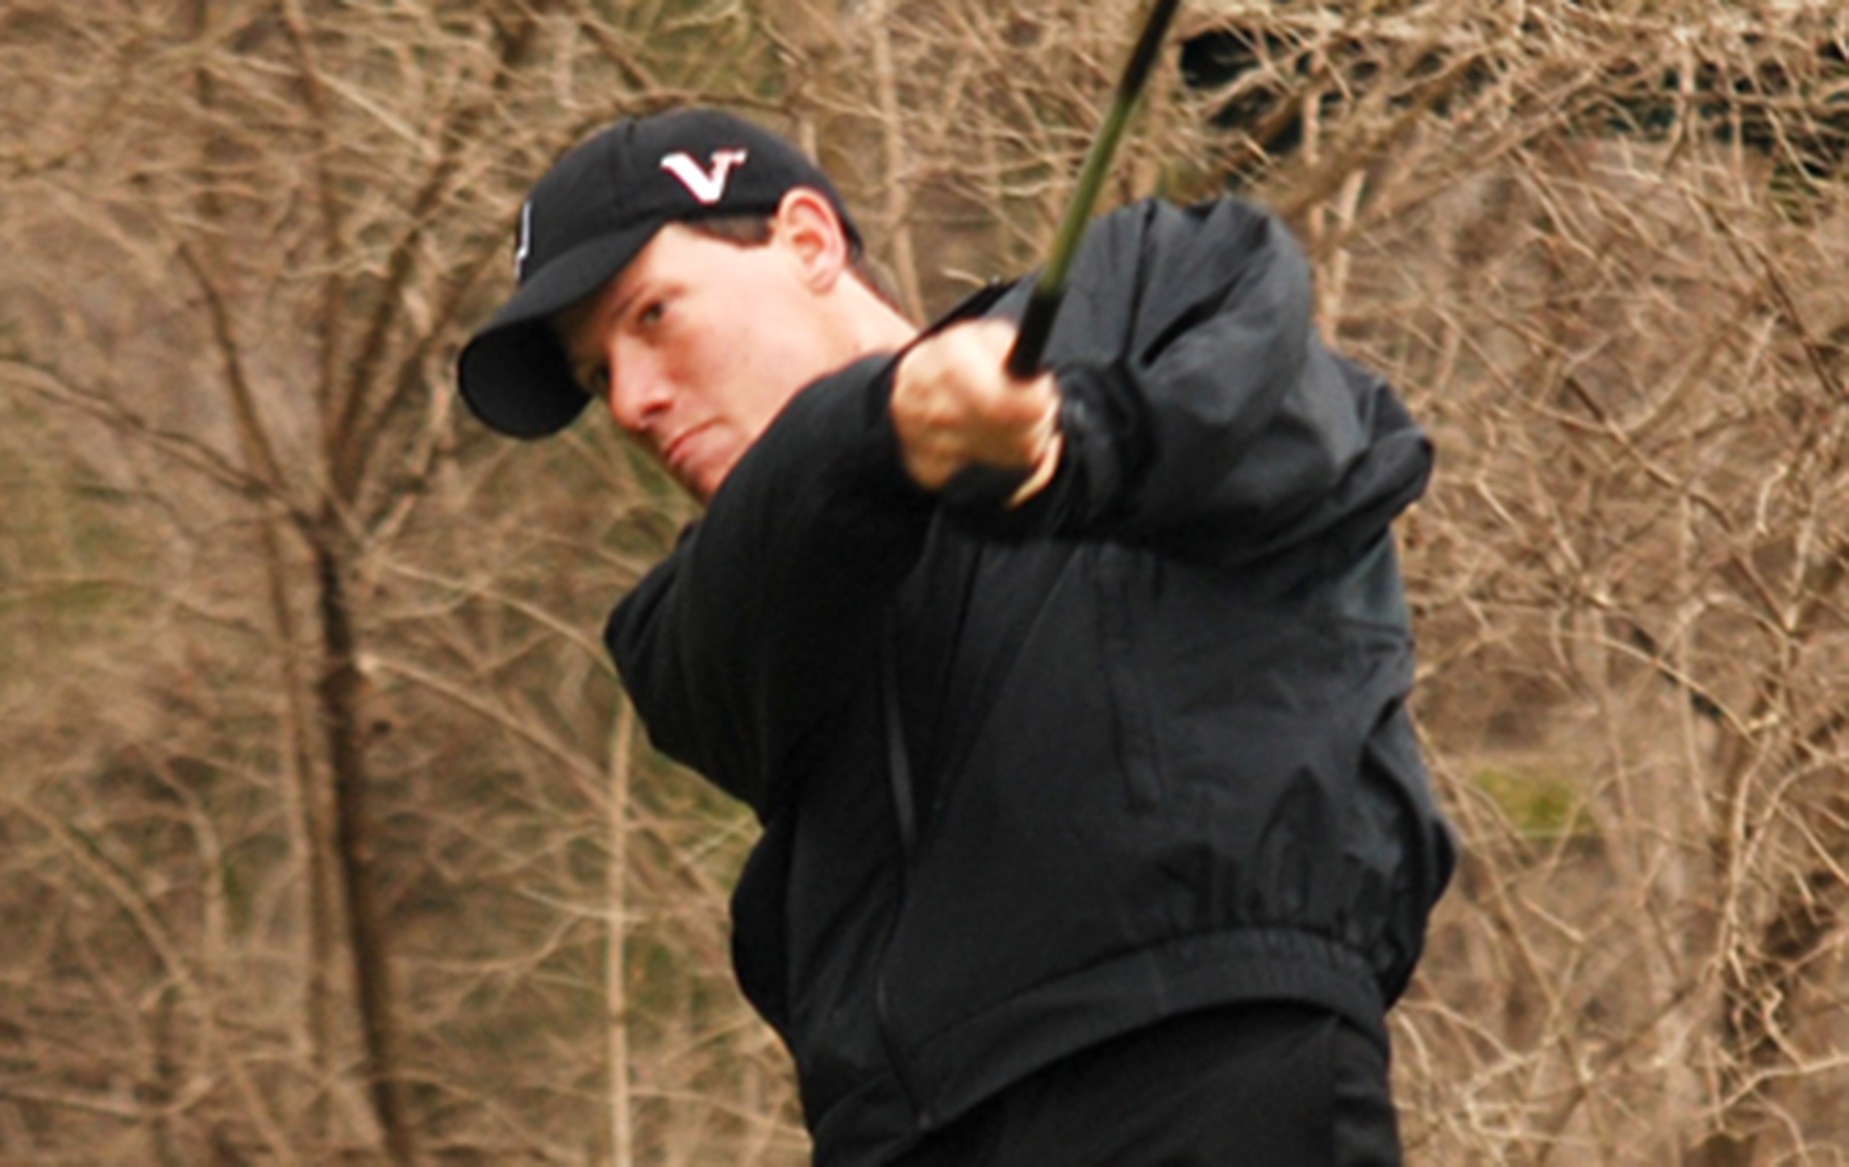 Ross Fires 76 to Lead Jackets at Defiance Invitational